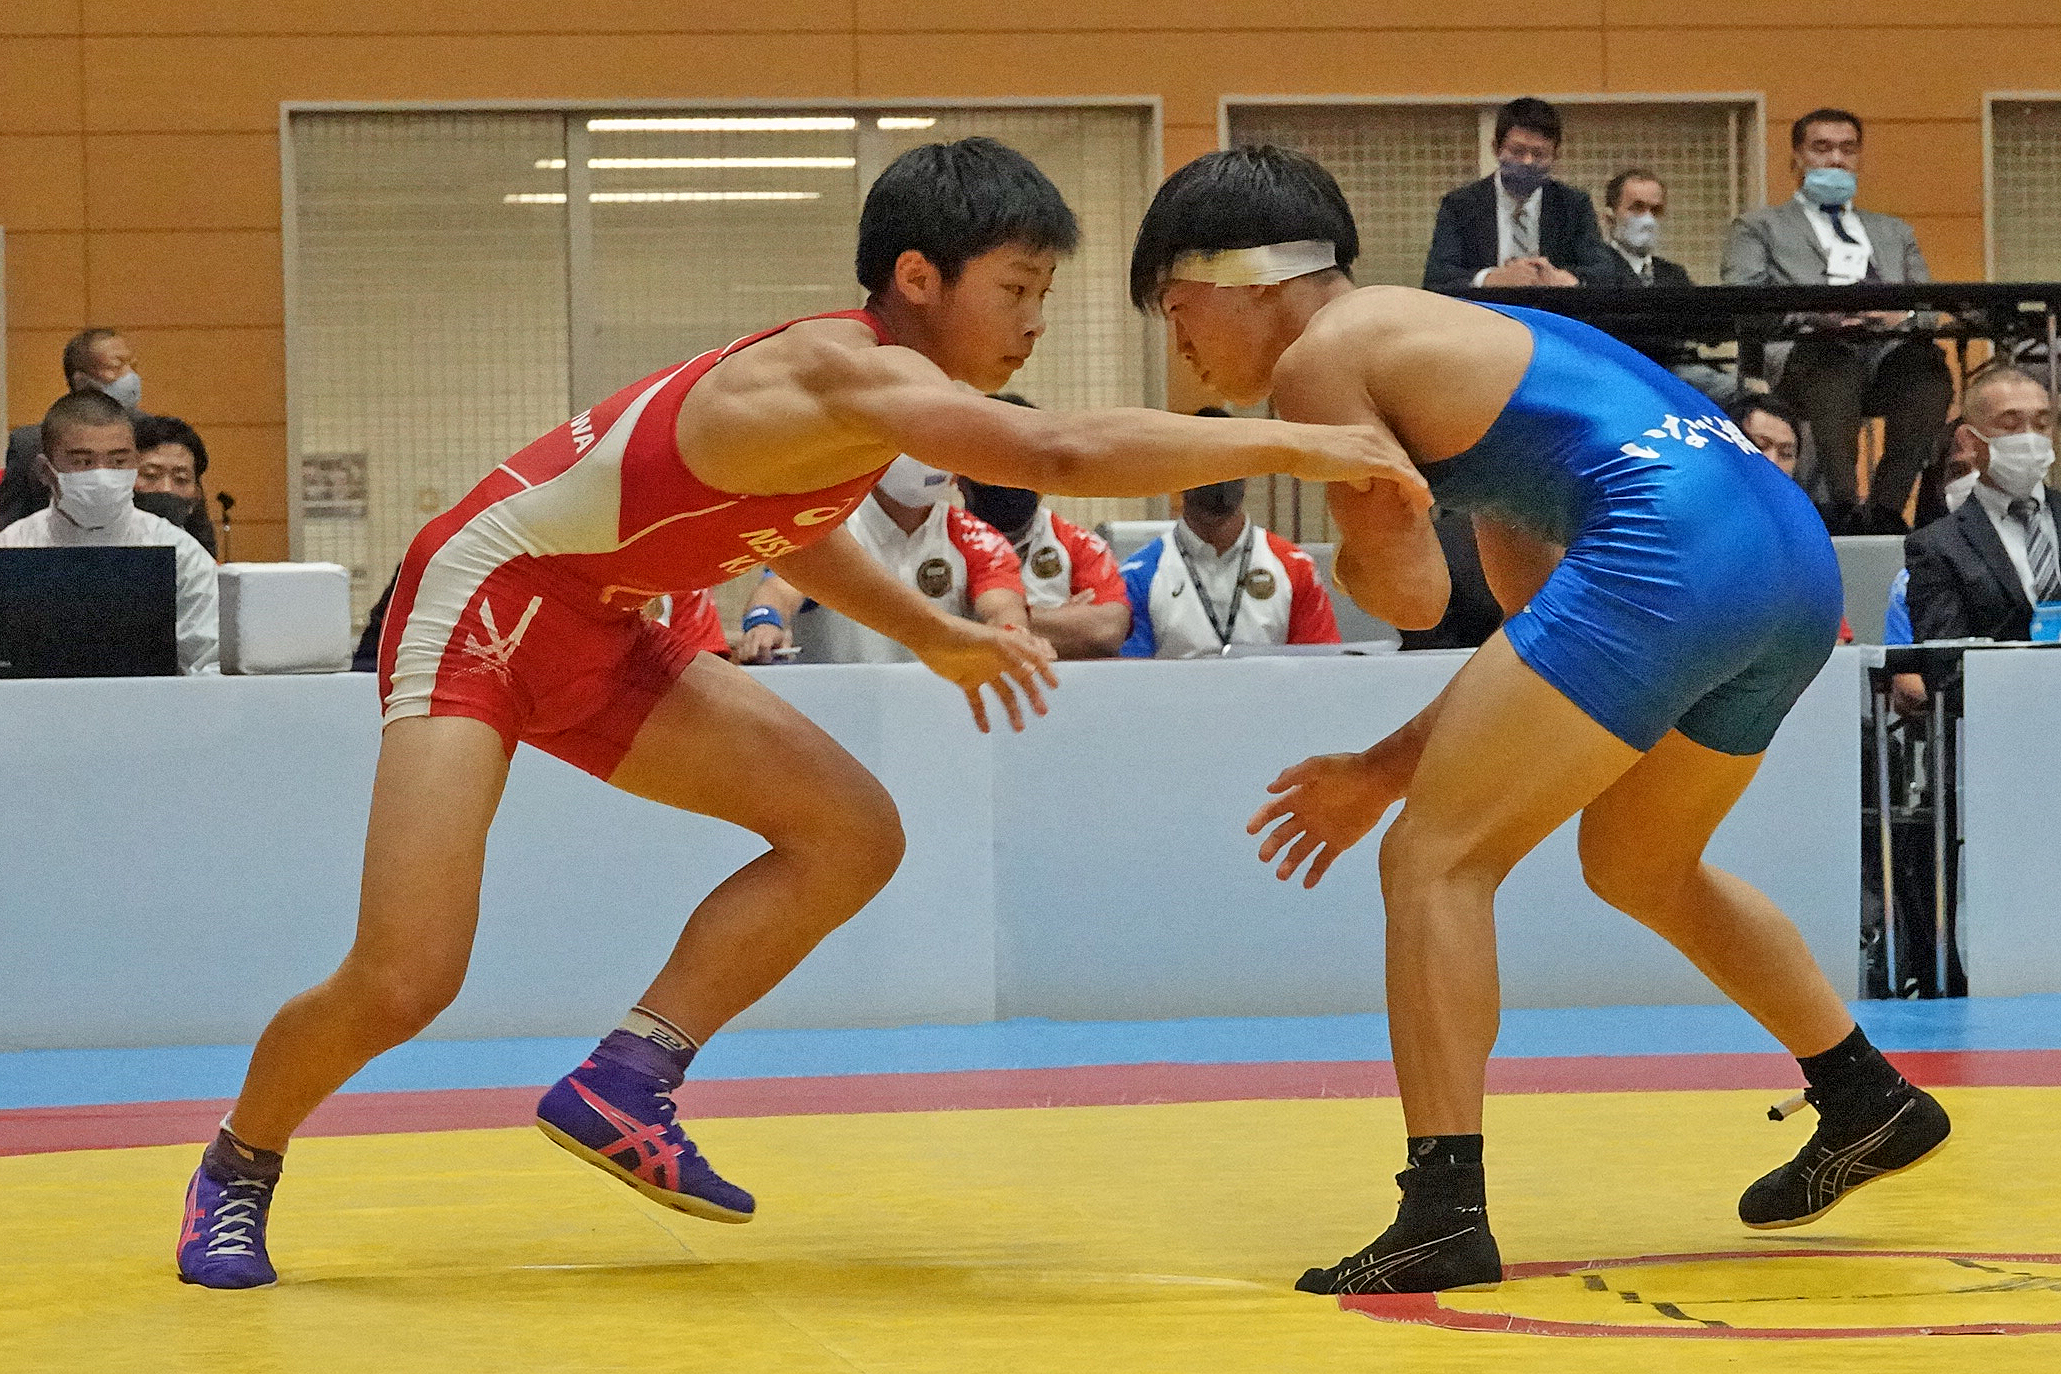 Kaisei TANABE (NSSU Kashiwa), the son of an Olympic medalist, had to settle for the silver after a loss in the 55kg final to Kento YUMIYA (Inabe Sogo Gakuen).  (Japan Wrestling Federation photo)